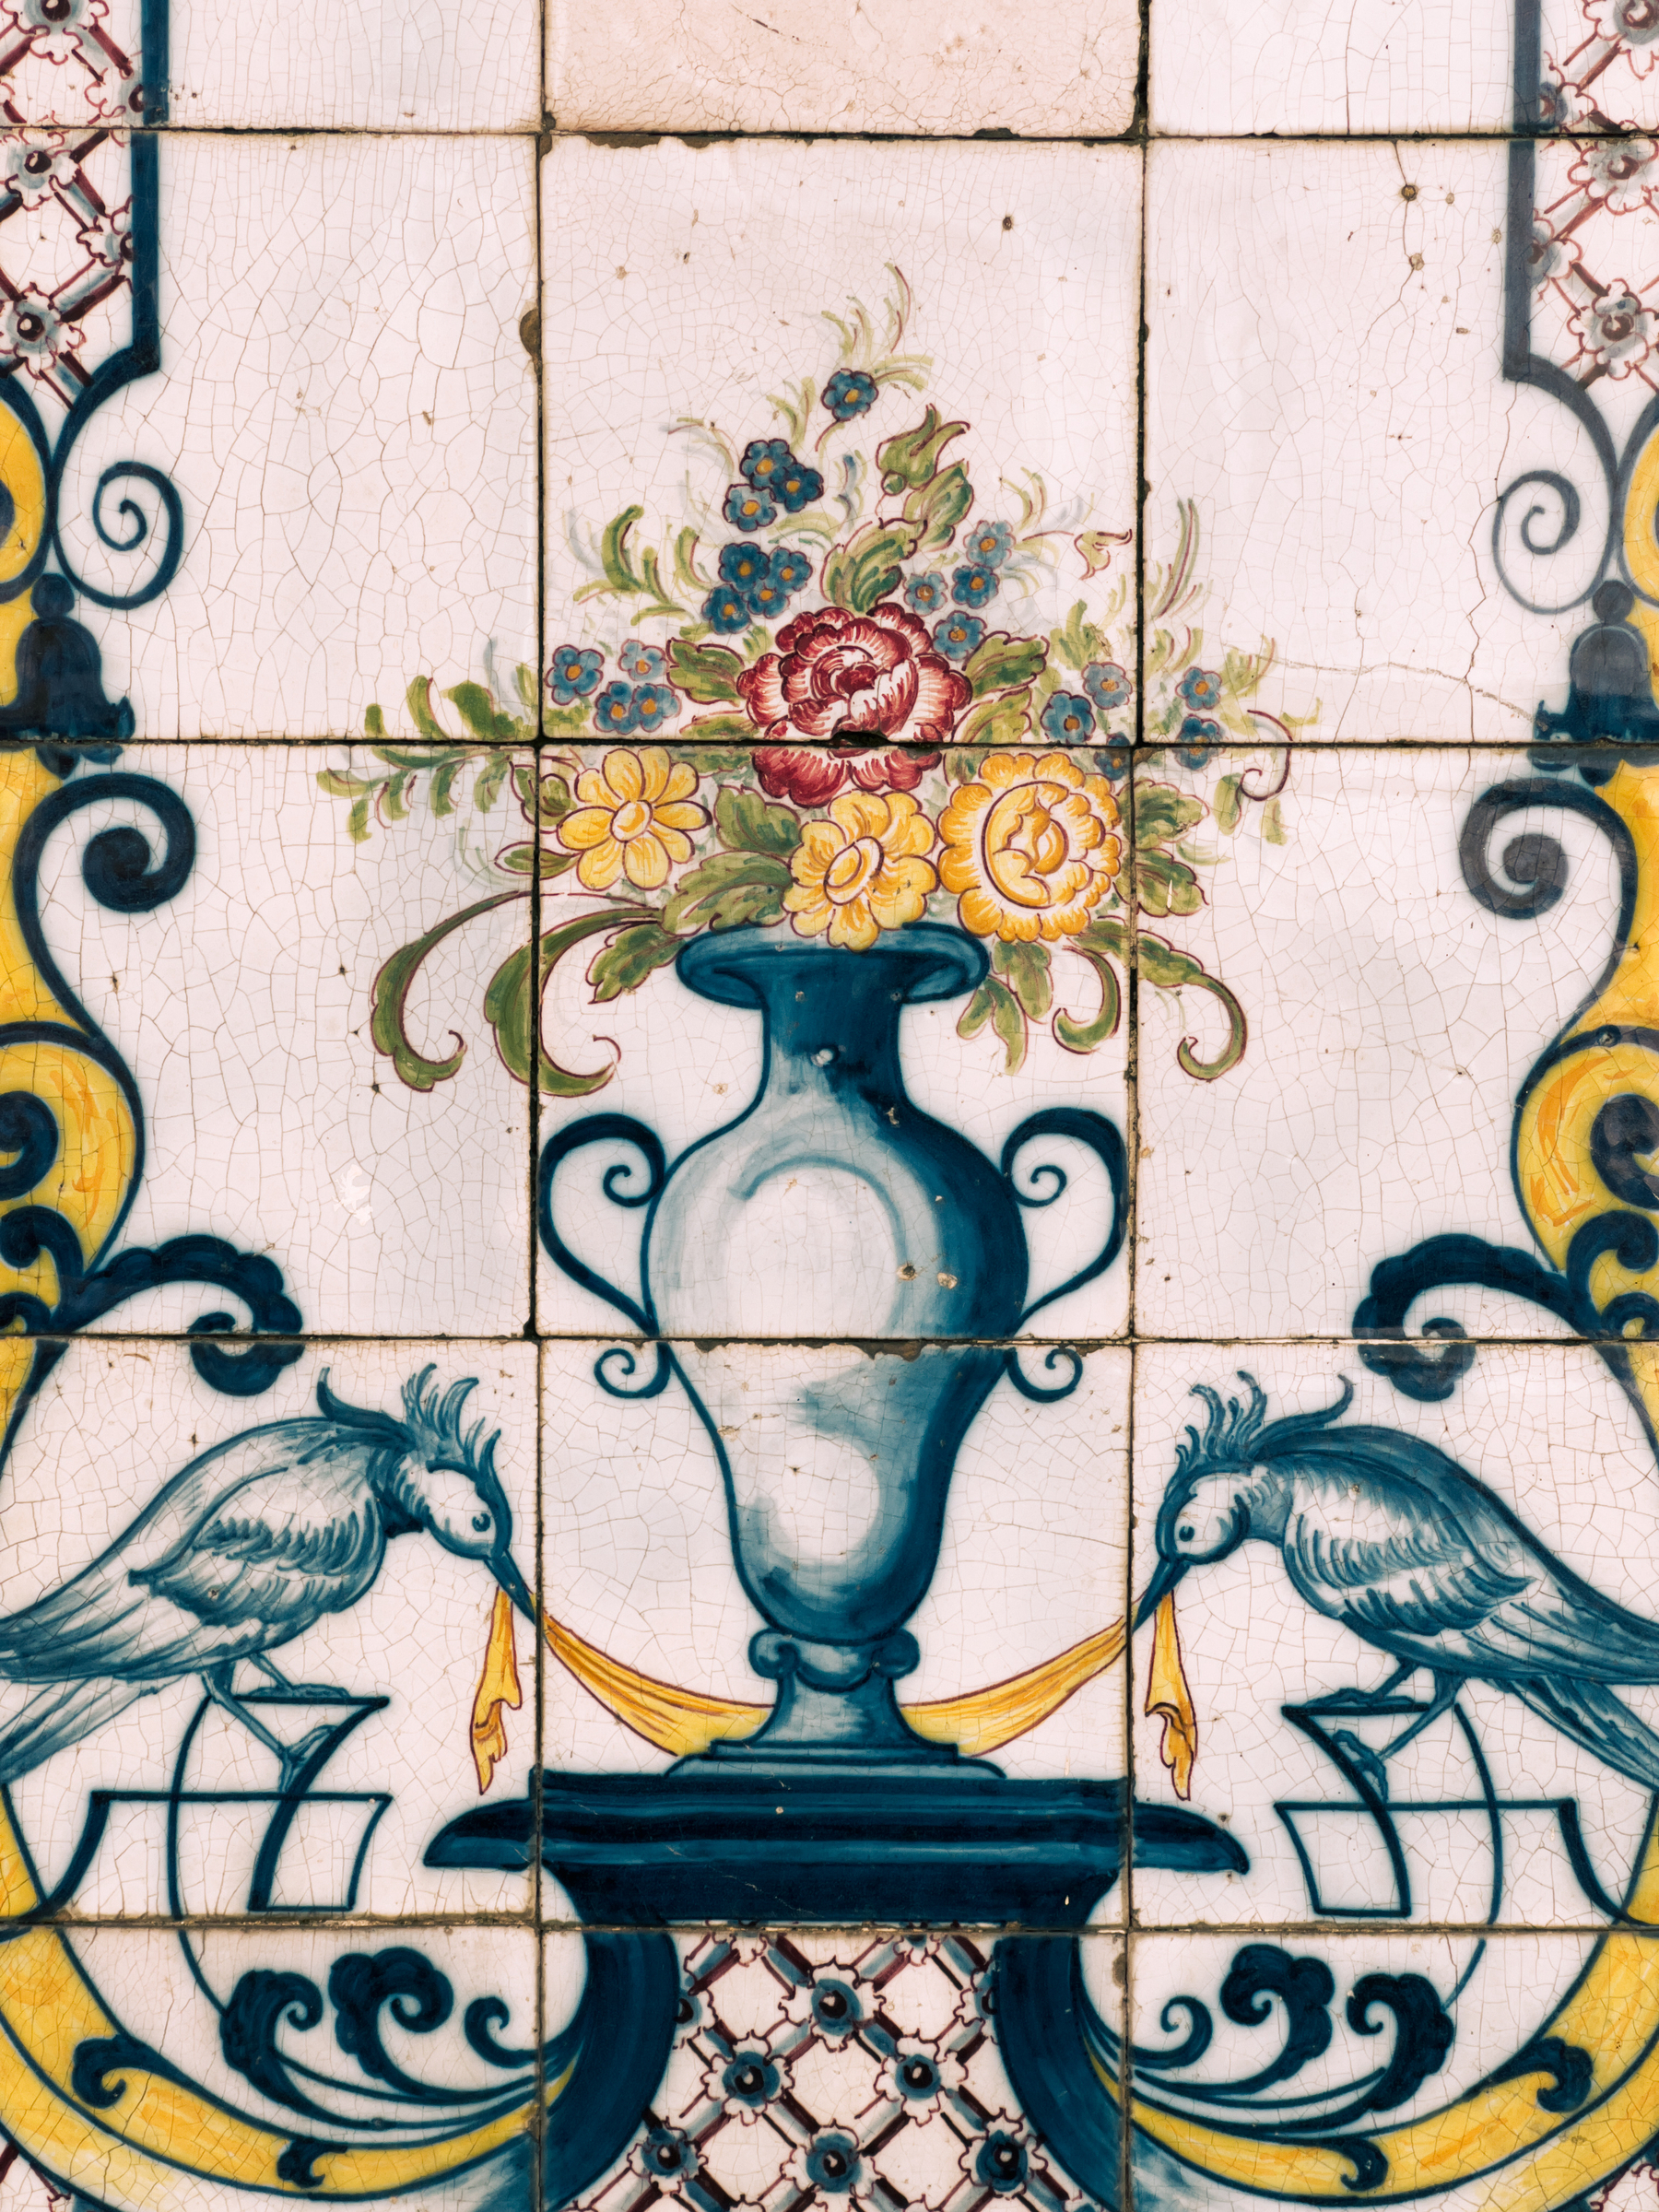 Detail of a tiled wall. A vase with flowers.